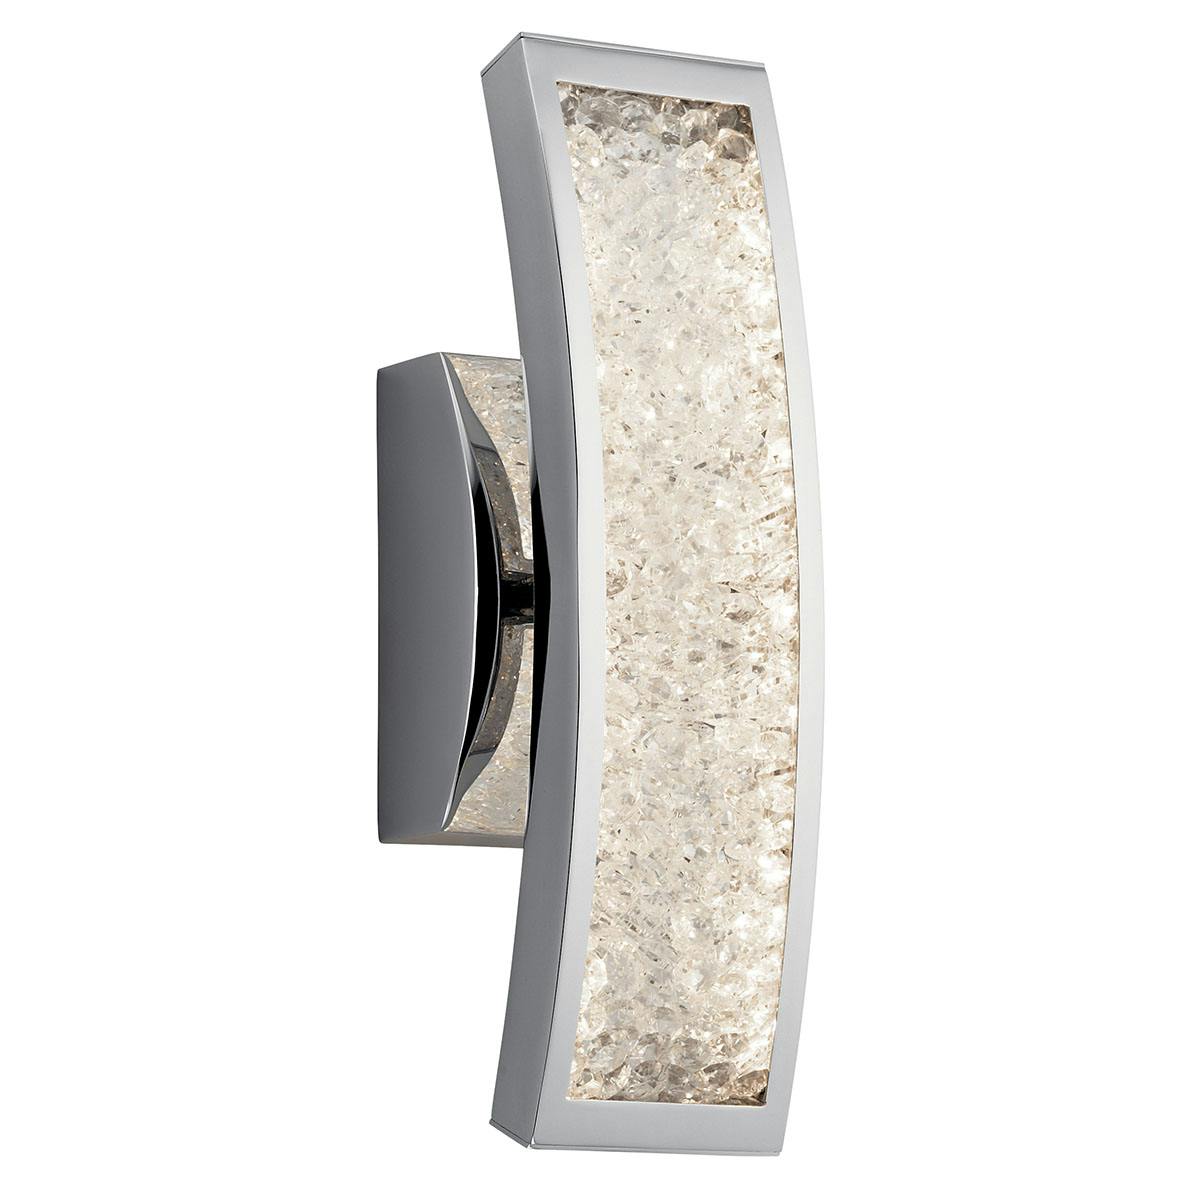 Crushed Ice 3200K 1 Light Sconce Chrome hung vertically on a white background